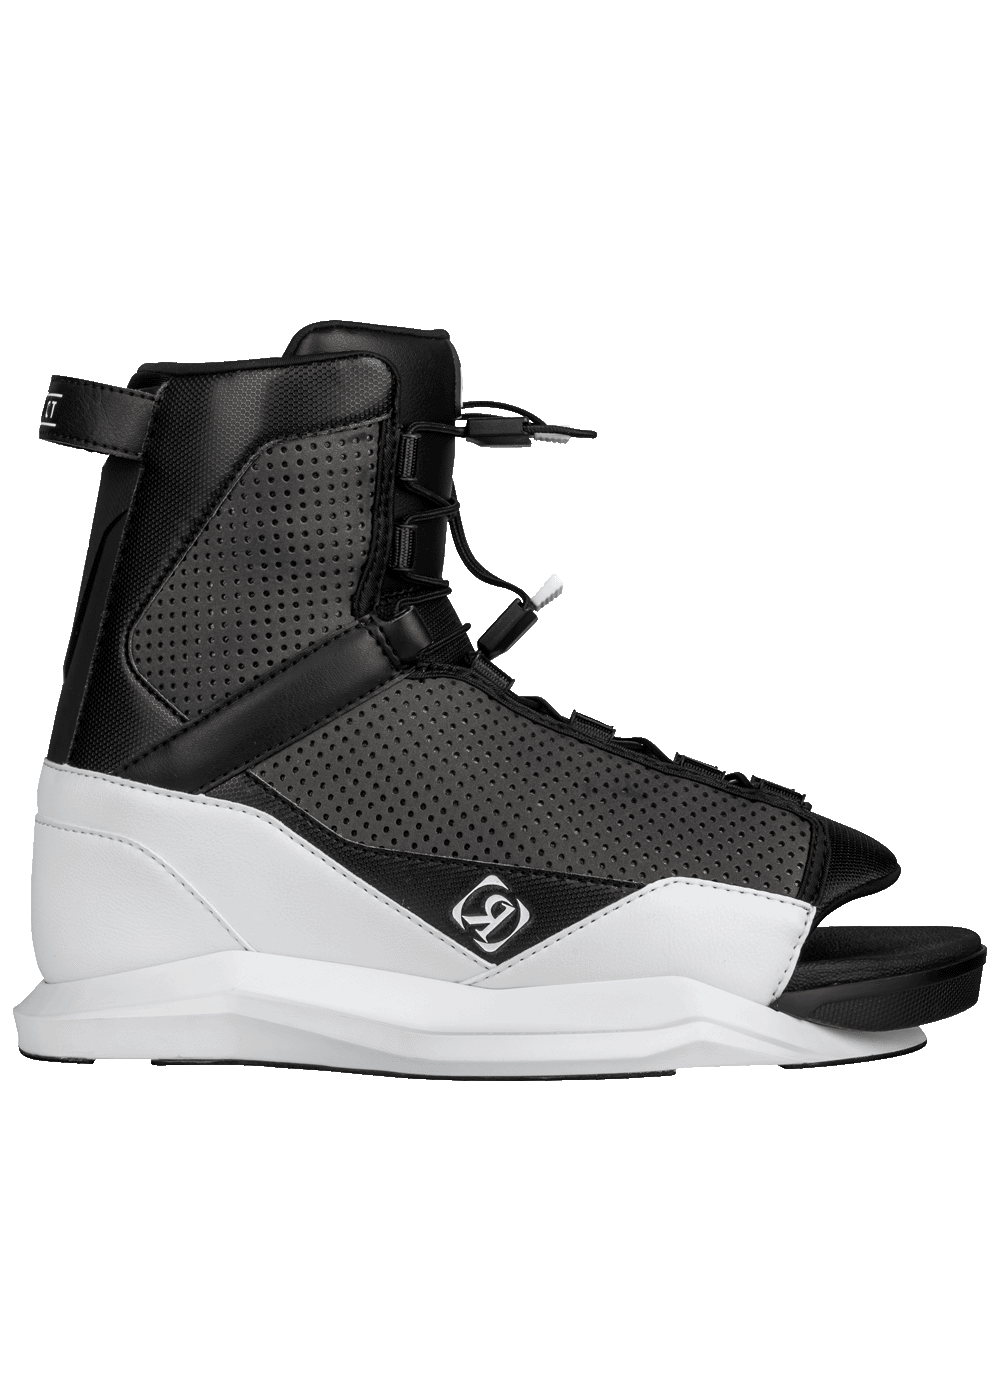 Blue/White/Black Wakeboard Boots-5-8.5 Ronix 2019 District 